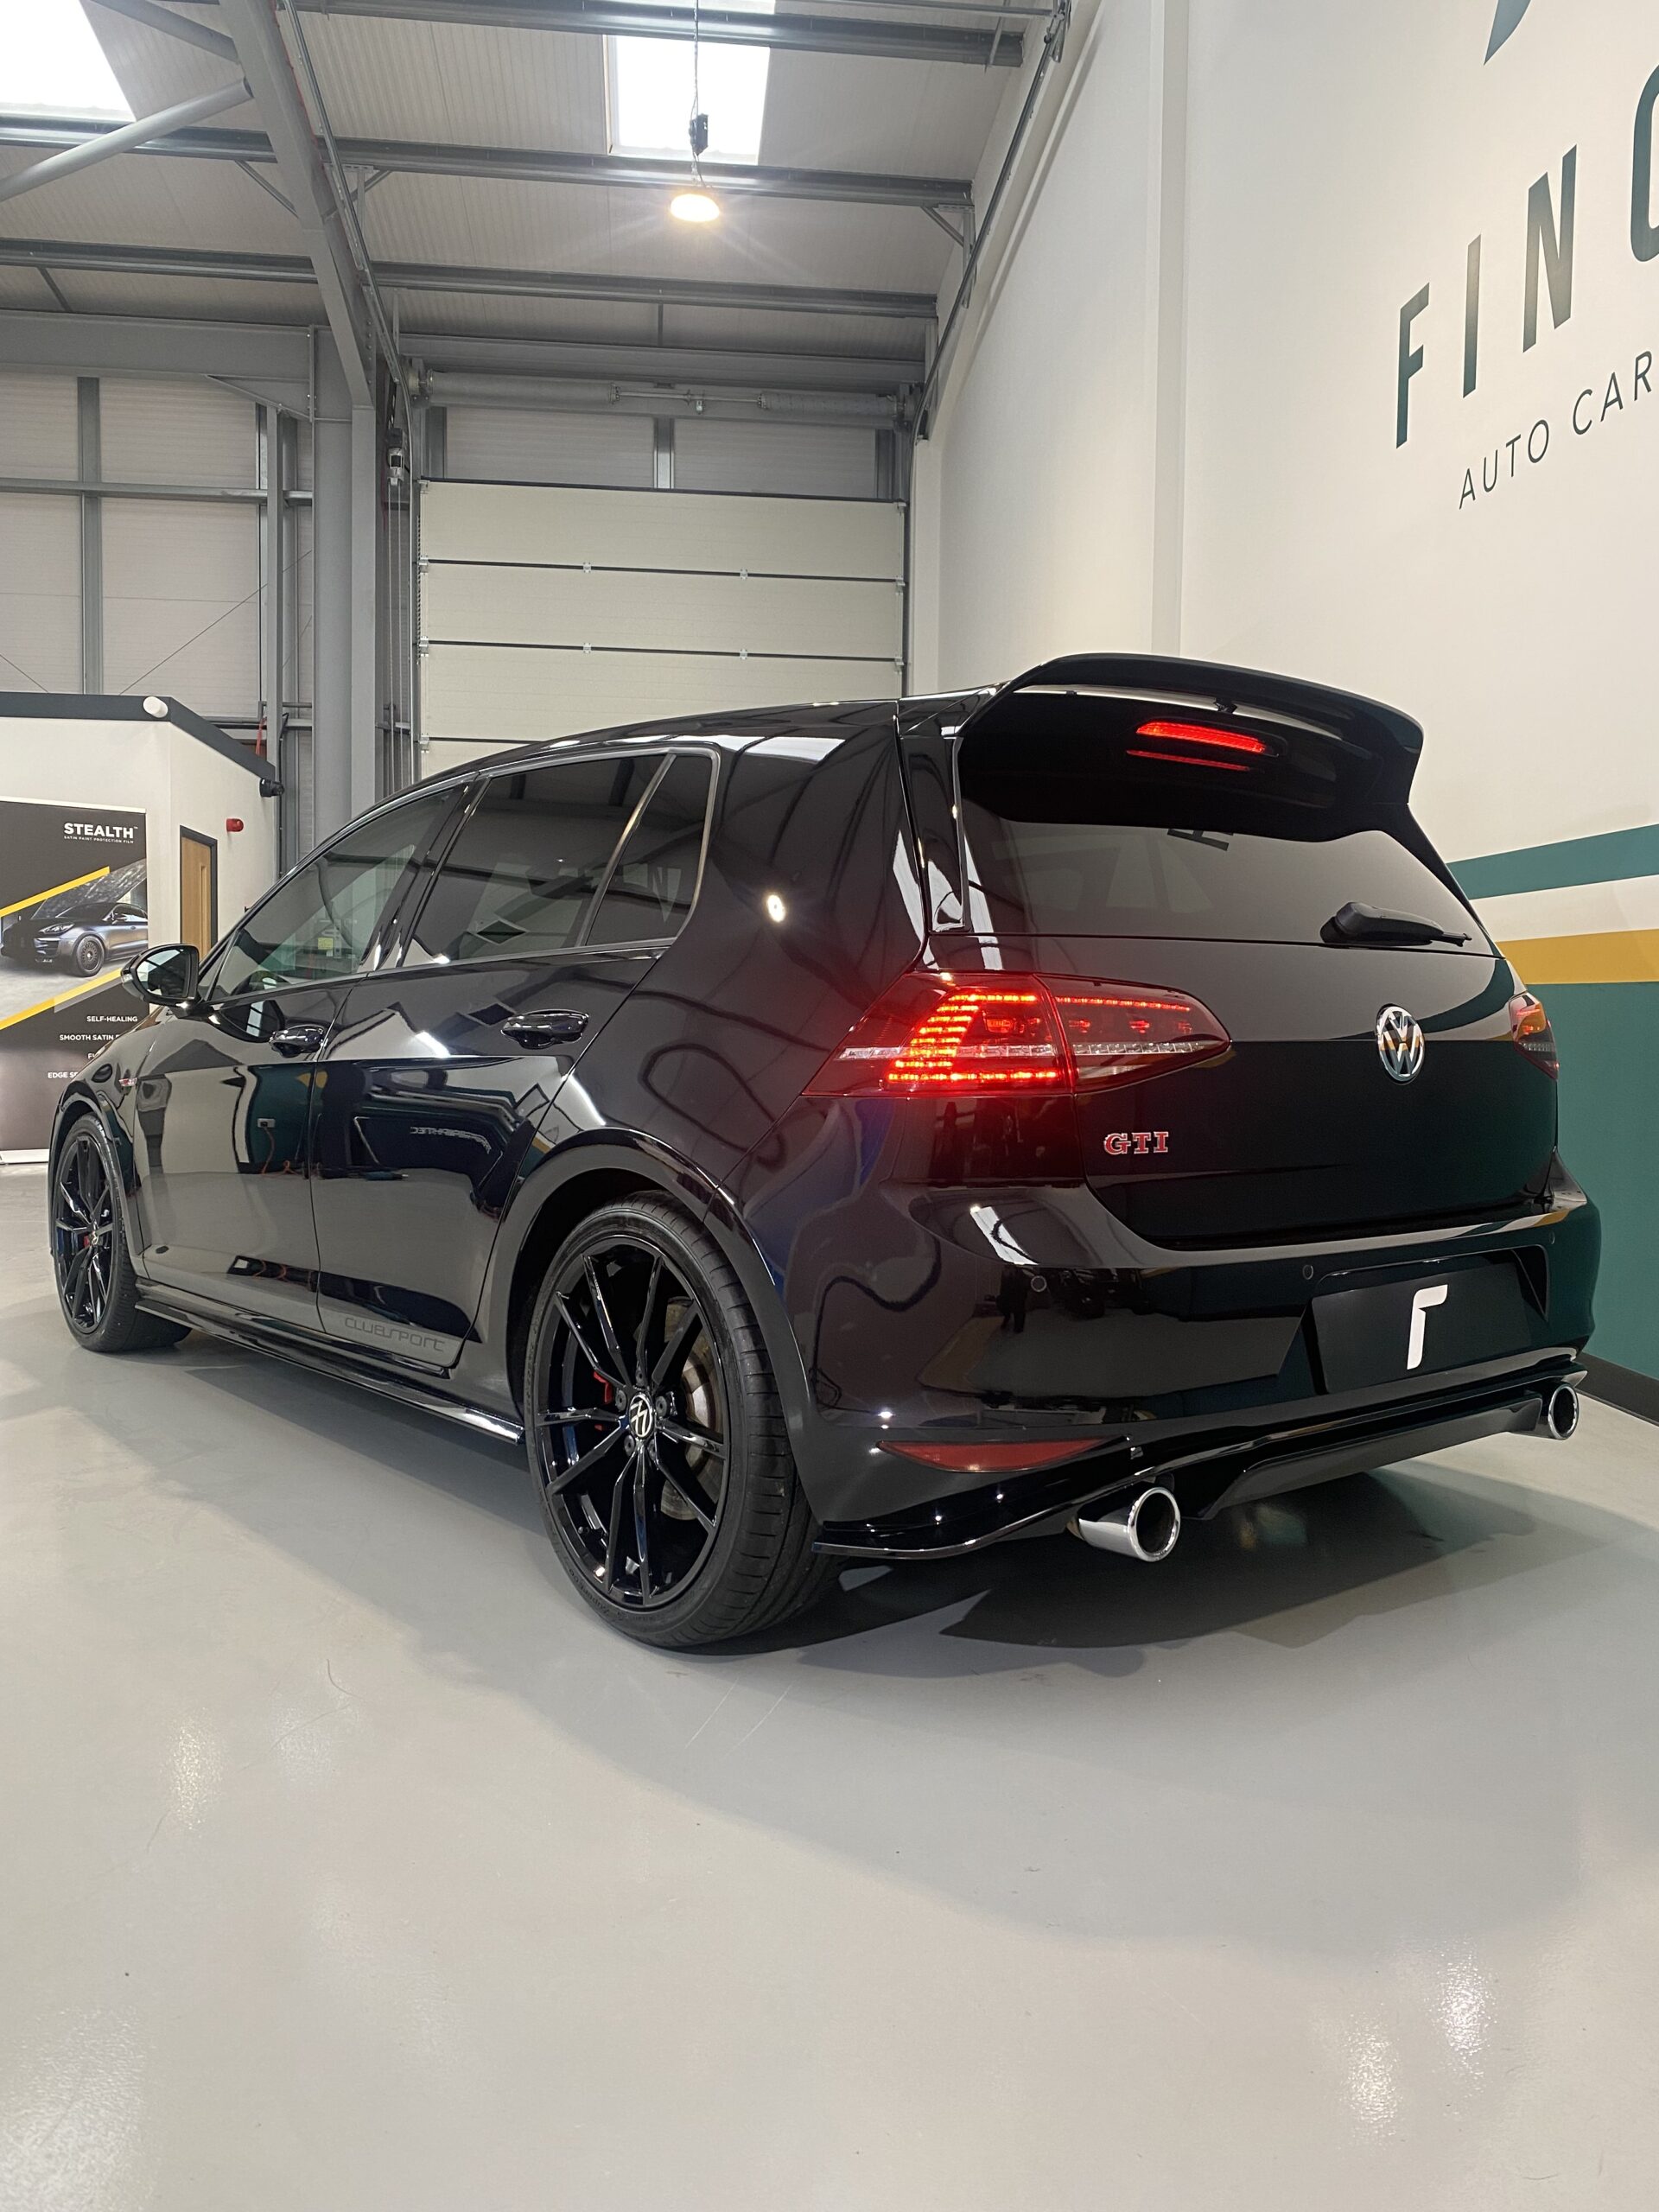 Black volkswagen golf gti parked in a showroom with trunk open.